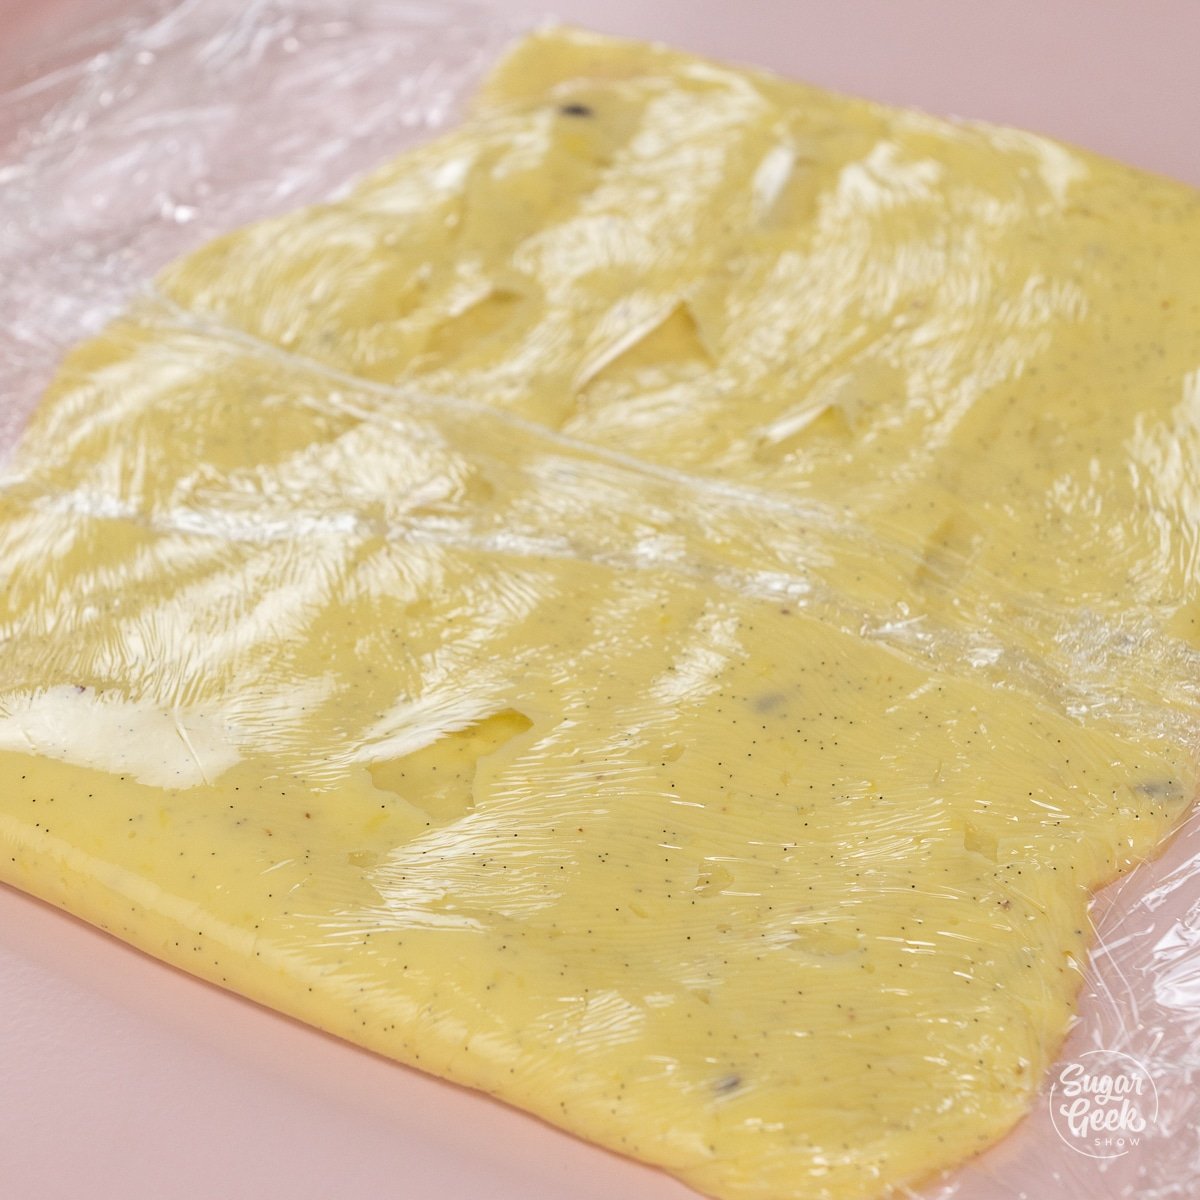 pastry cream wrapped in plastic wrap and shaped into a rectangle